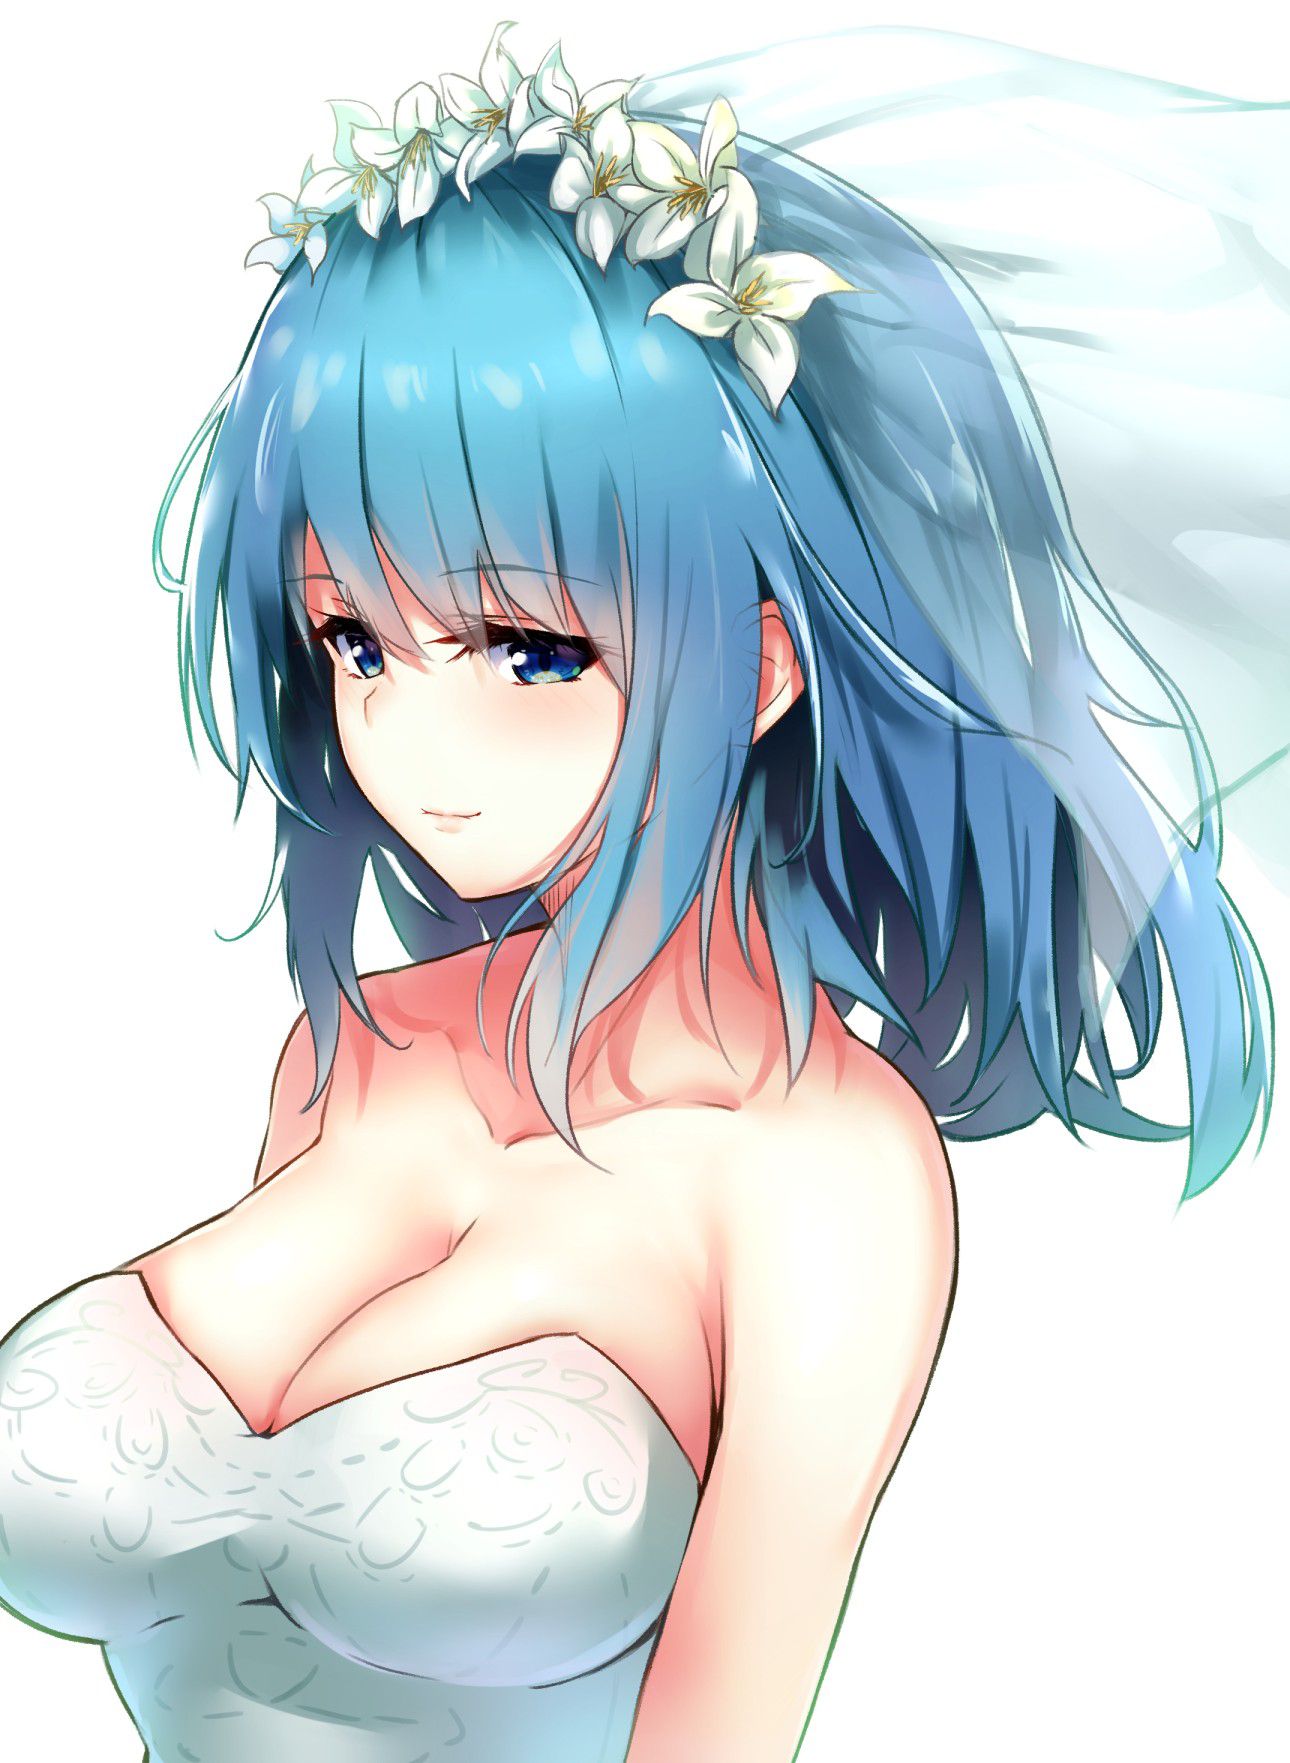 [2nd] Secondary erotic image of a girl with blue or light blue hair Part 18 [ blue hair ] 20